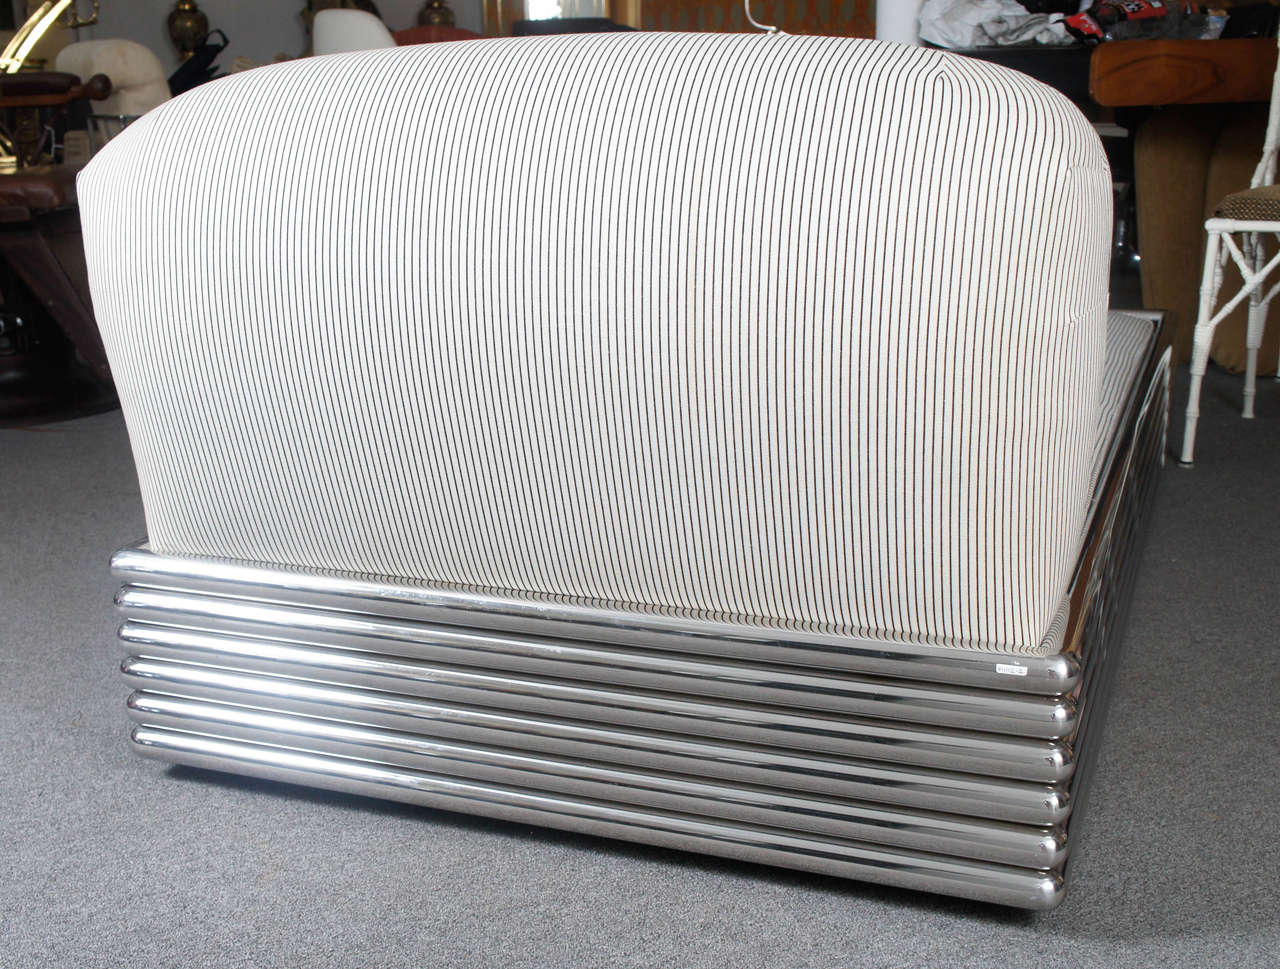 20th Century Pair polished stainless steel radiator Brueton Chaise Lounges or Daybeds